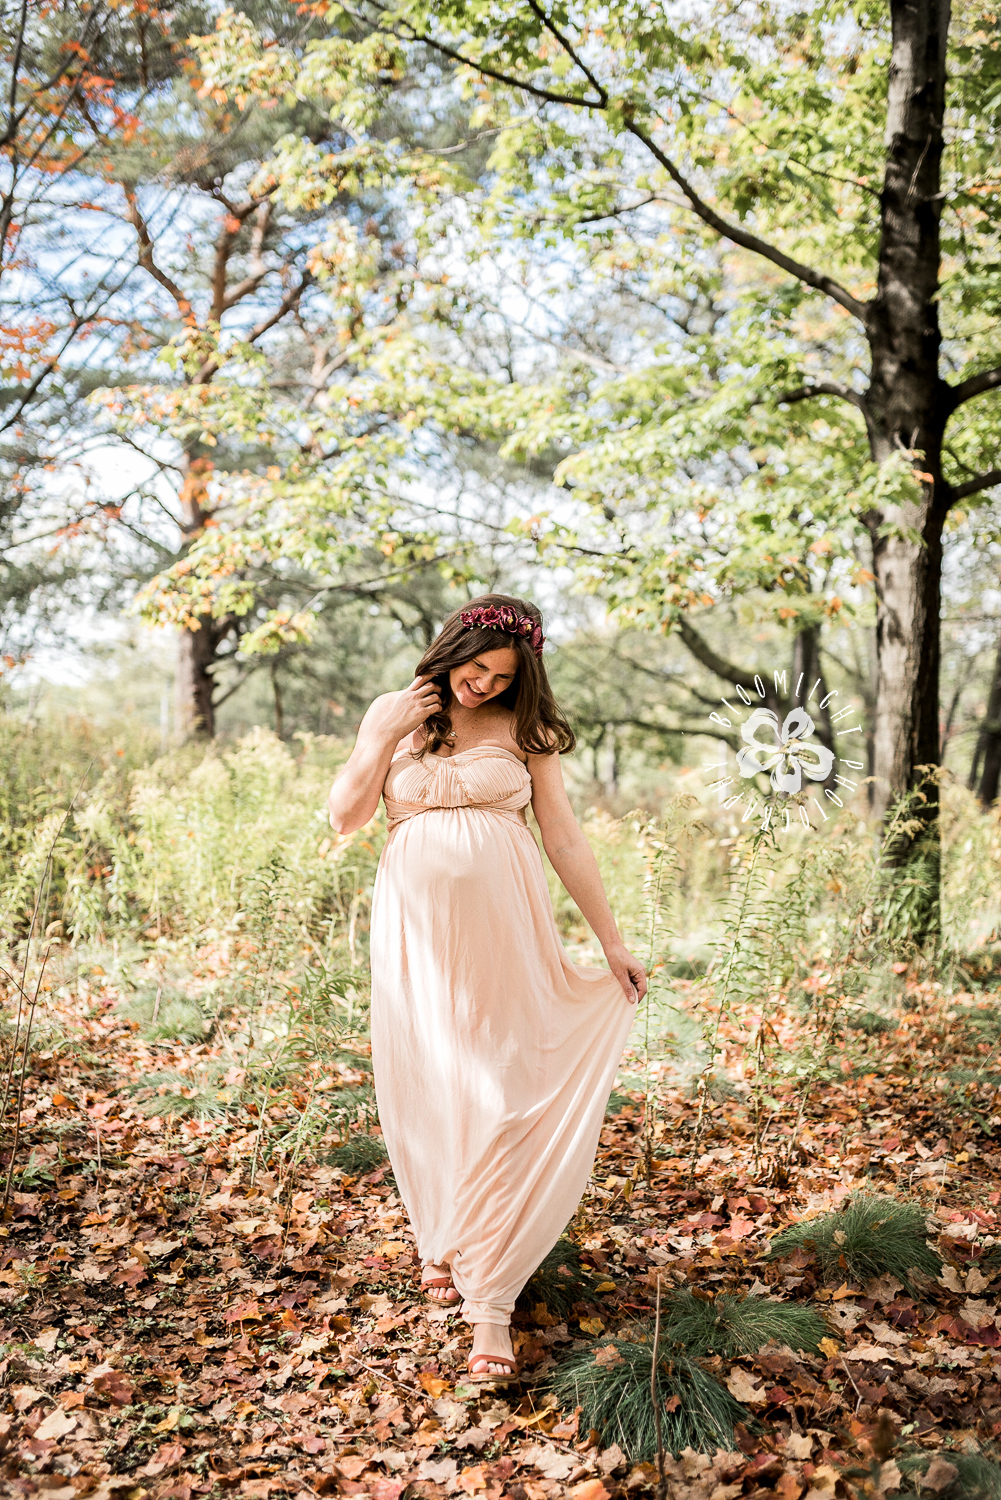 5 Best Shops to Buy Dresses for Maternity Photo Shoot